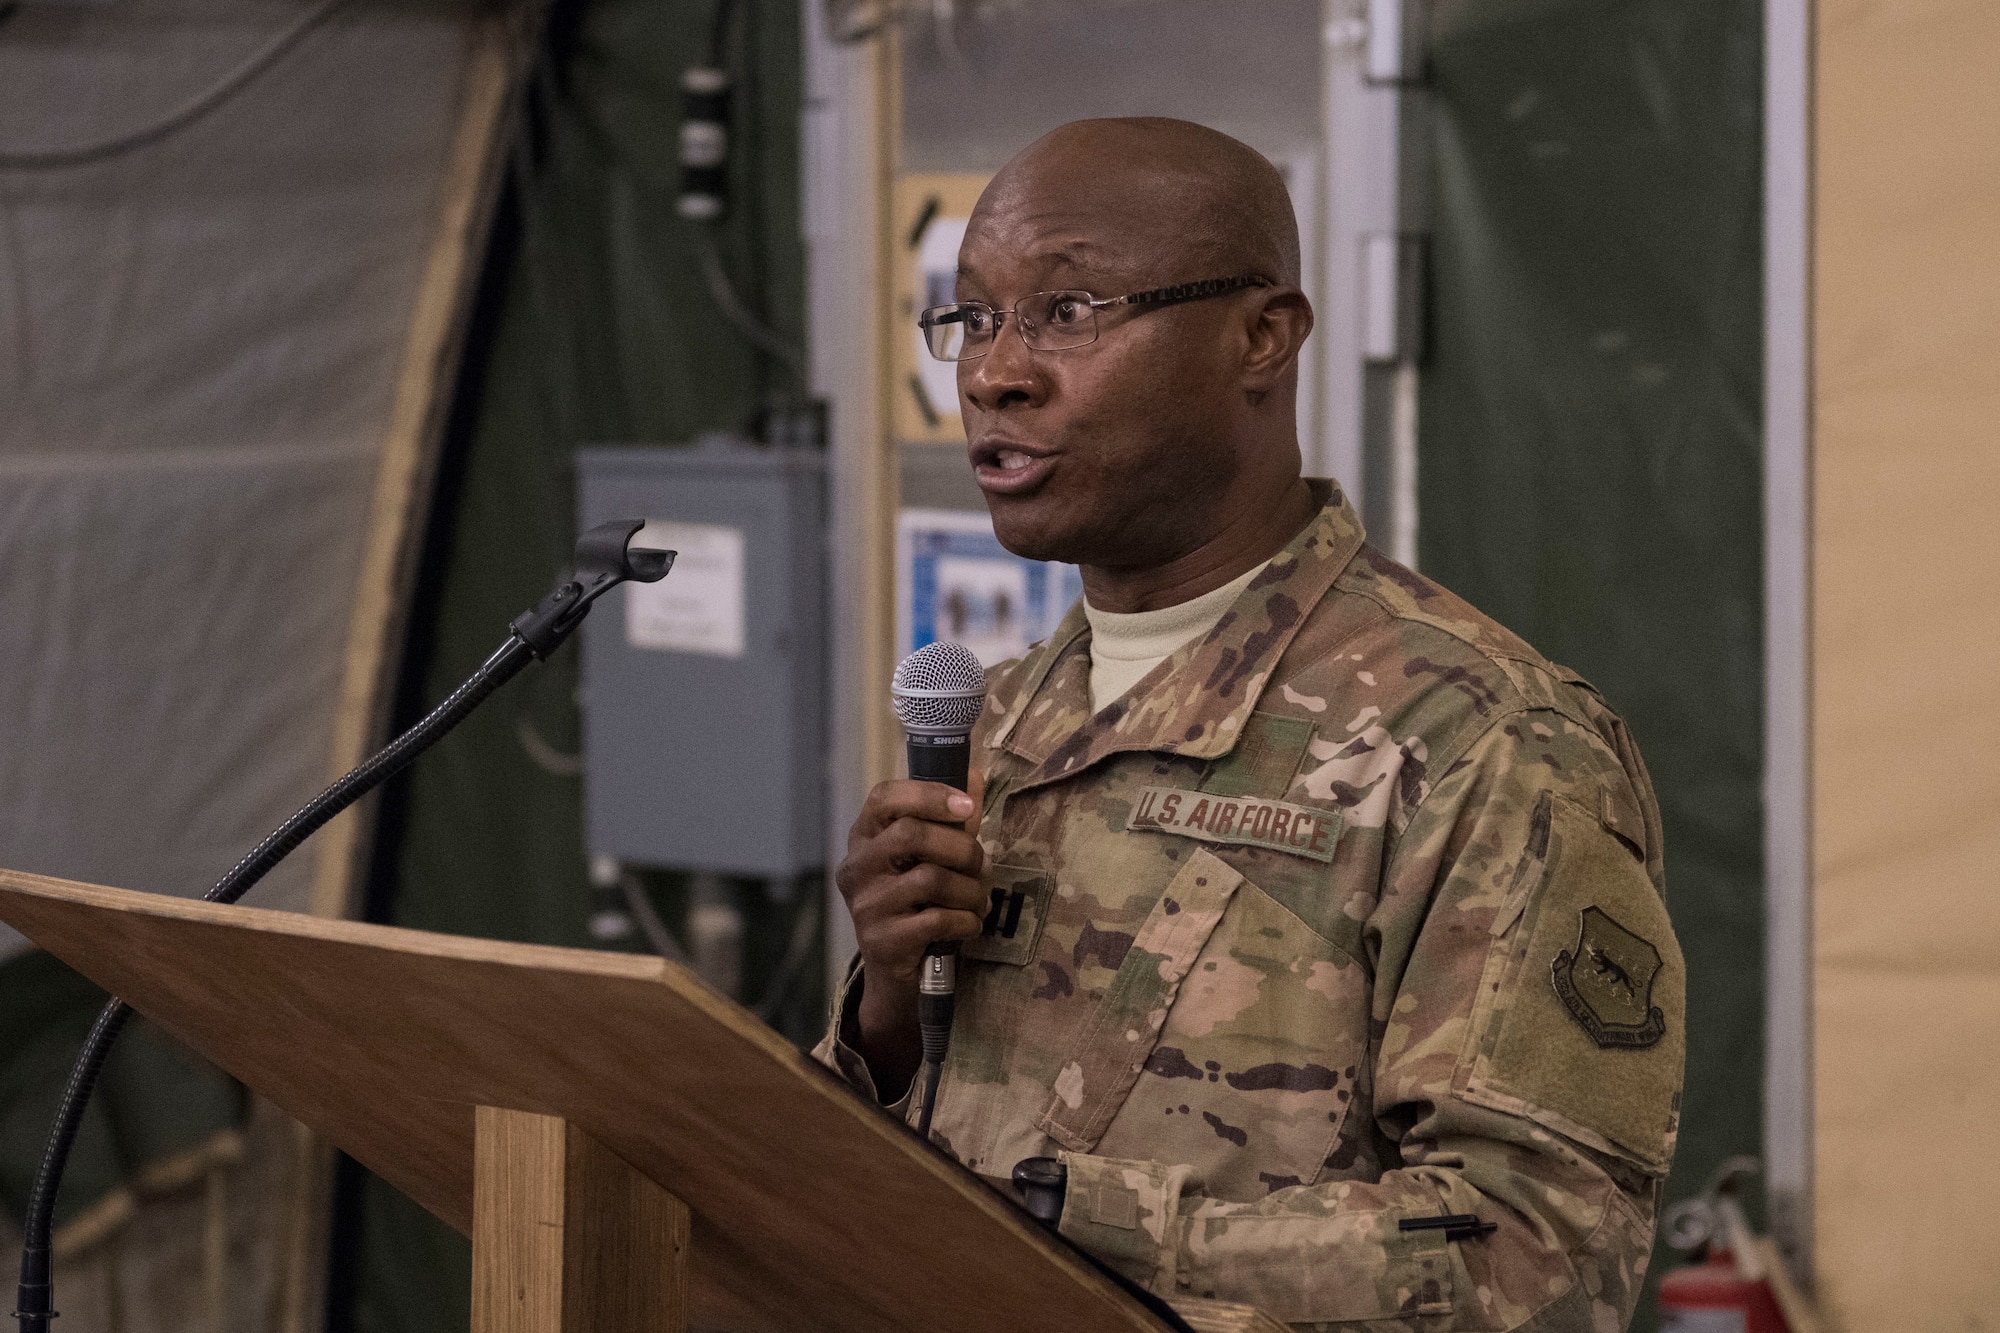 Capt. Brendan Mbagwu, 332nd Air Expeditionary Wing chaplain, recites a prayer during a breakfast the 332nd Air Expeditionary Wing held in observance of National Day of Prayer May 3, 2018, at an undisclosed location in Southwest Asia.